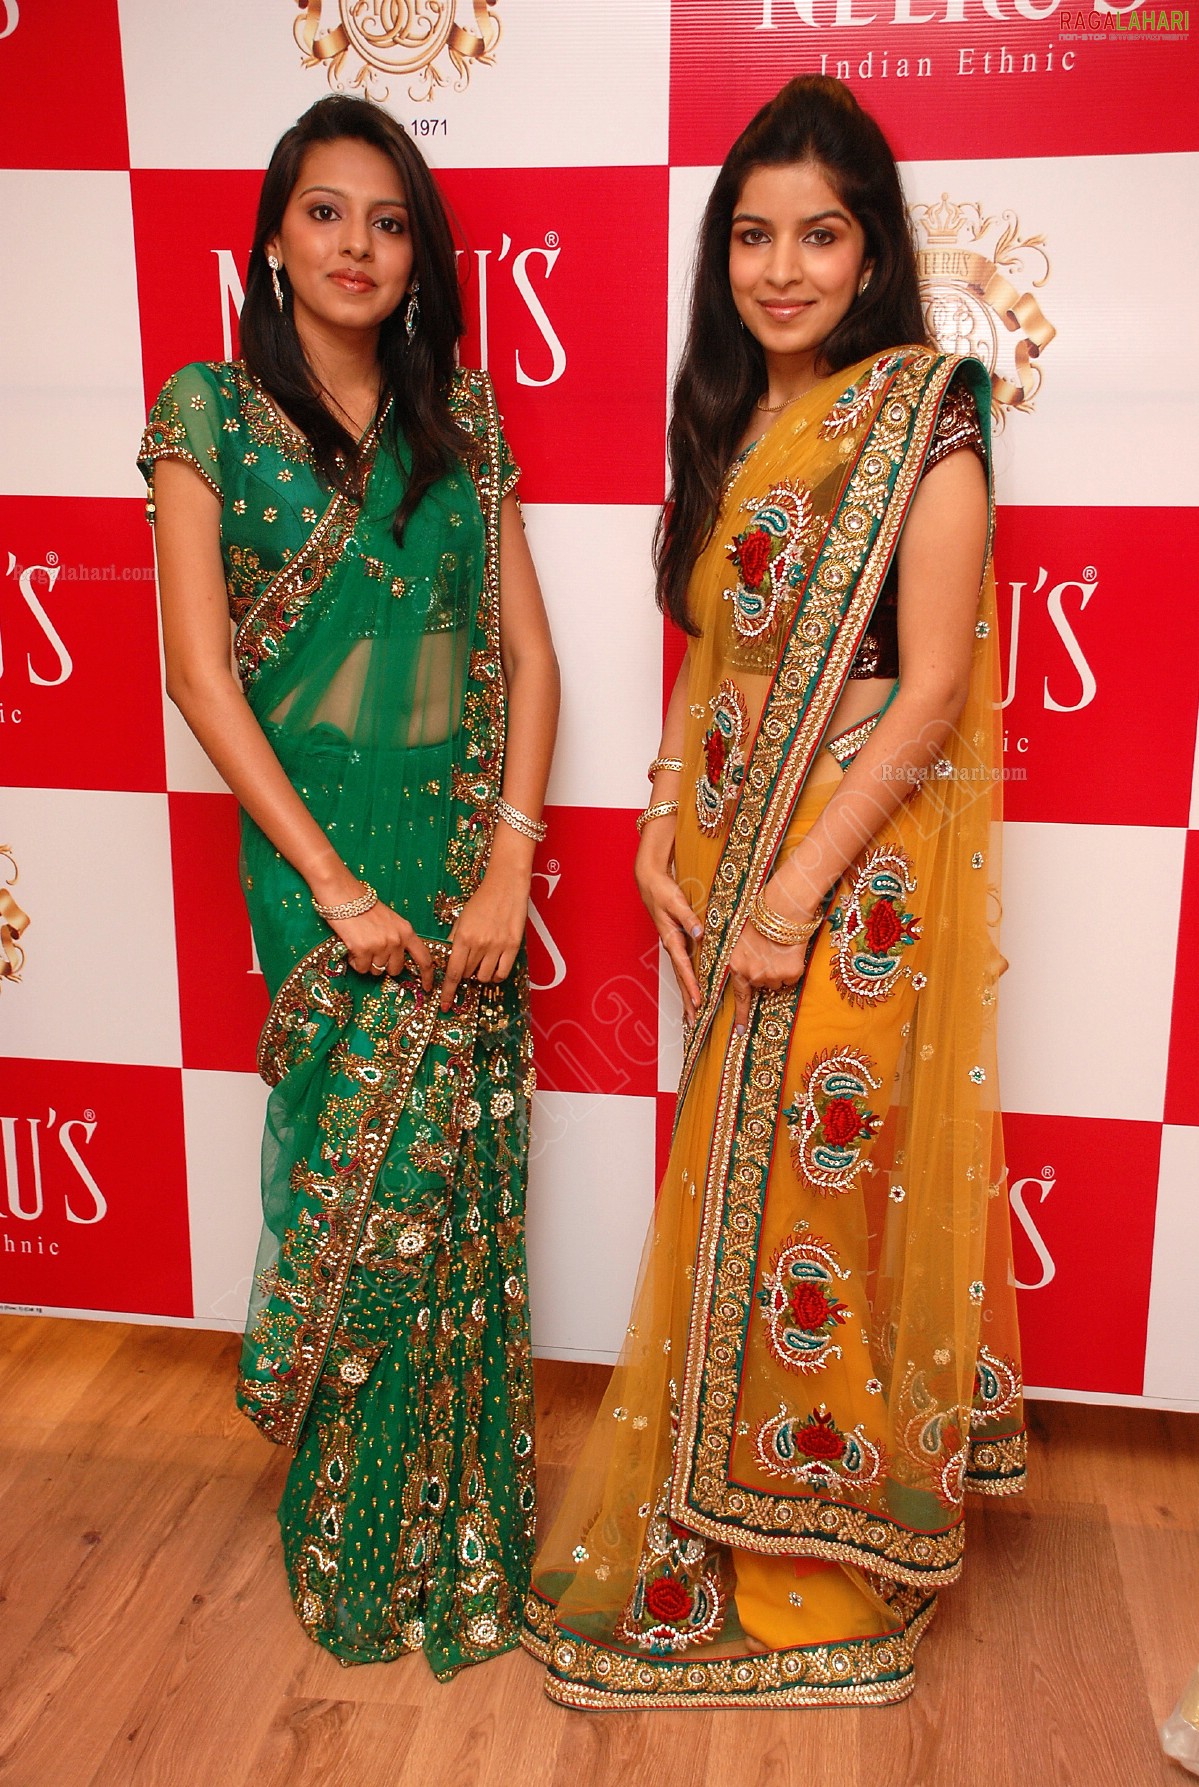 Neeru's New Festive & Wedding Collection Preview